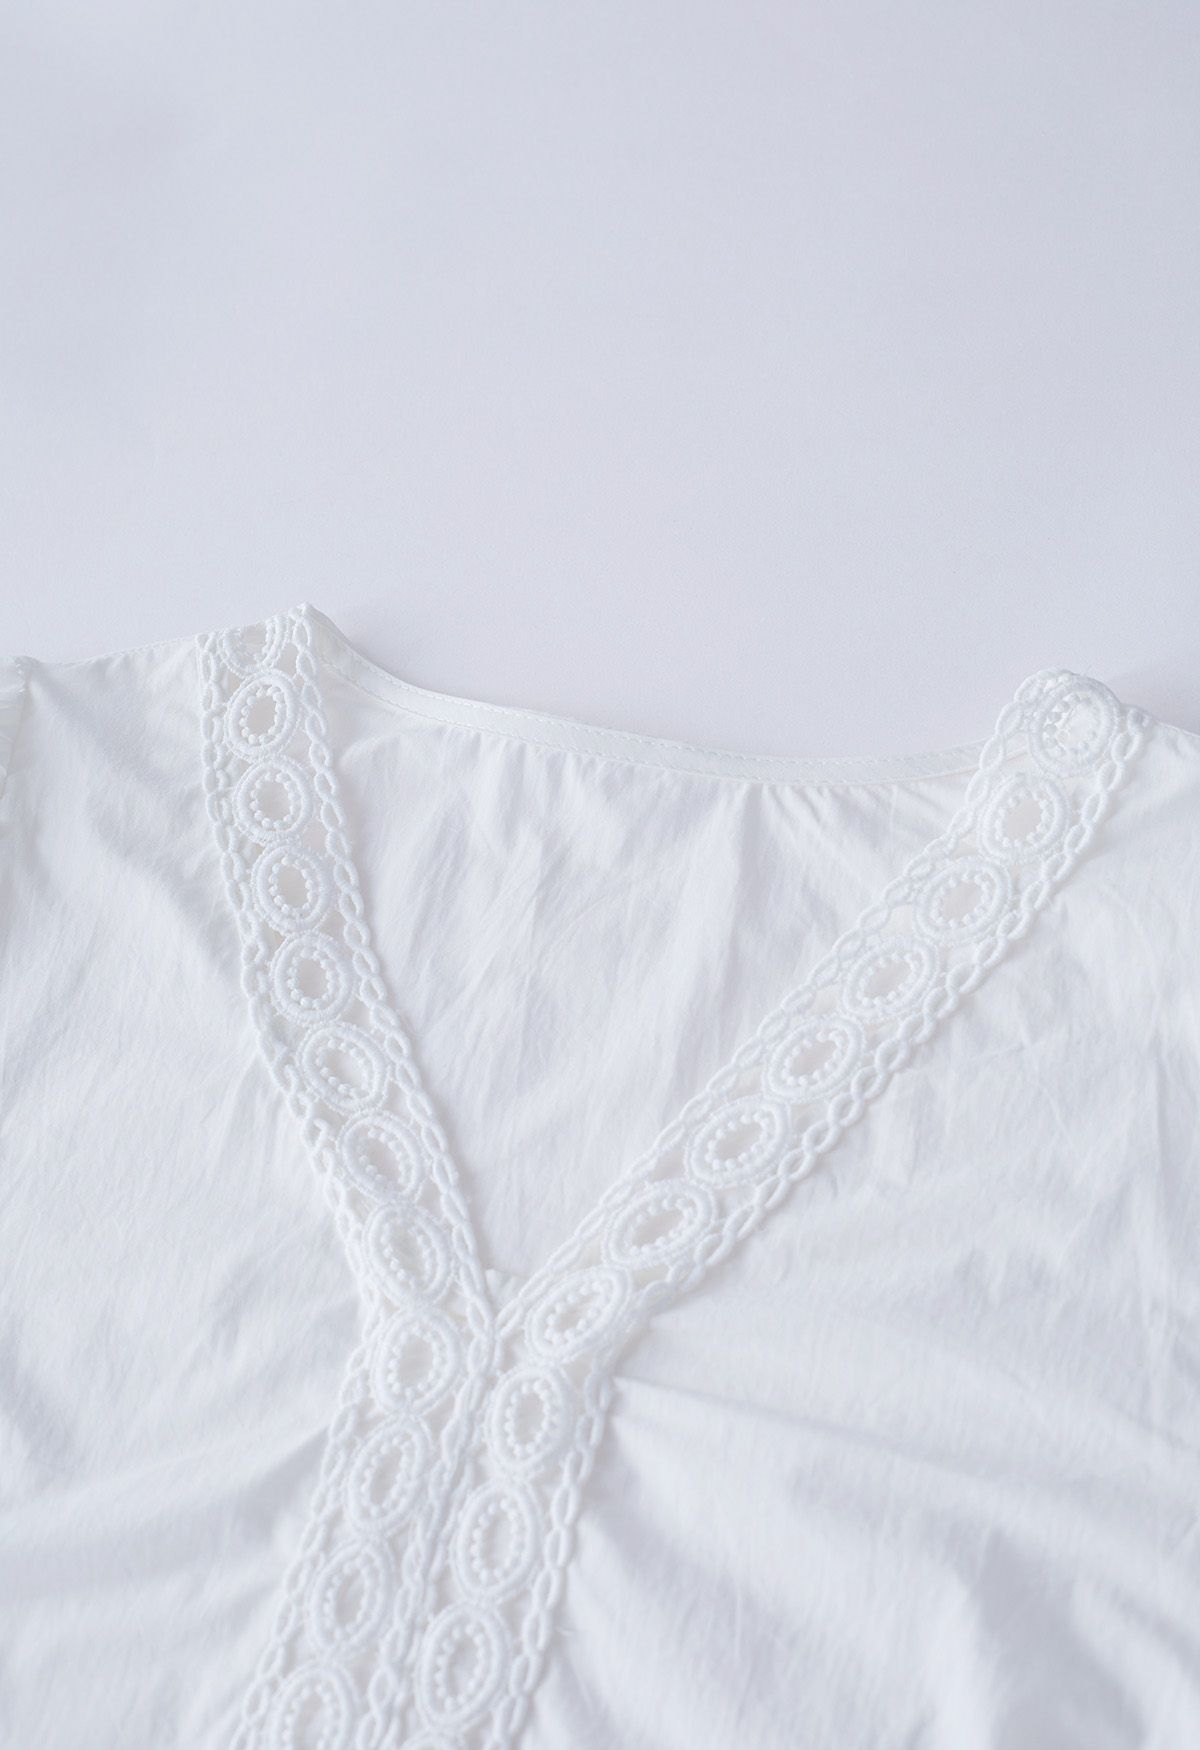 Cutwork Panelled Puff Sleeves Top in White